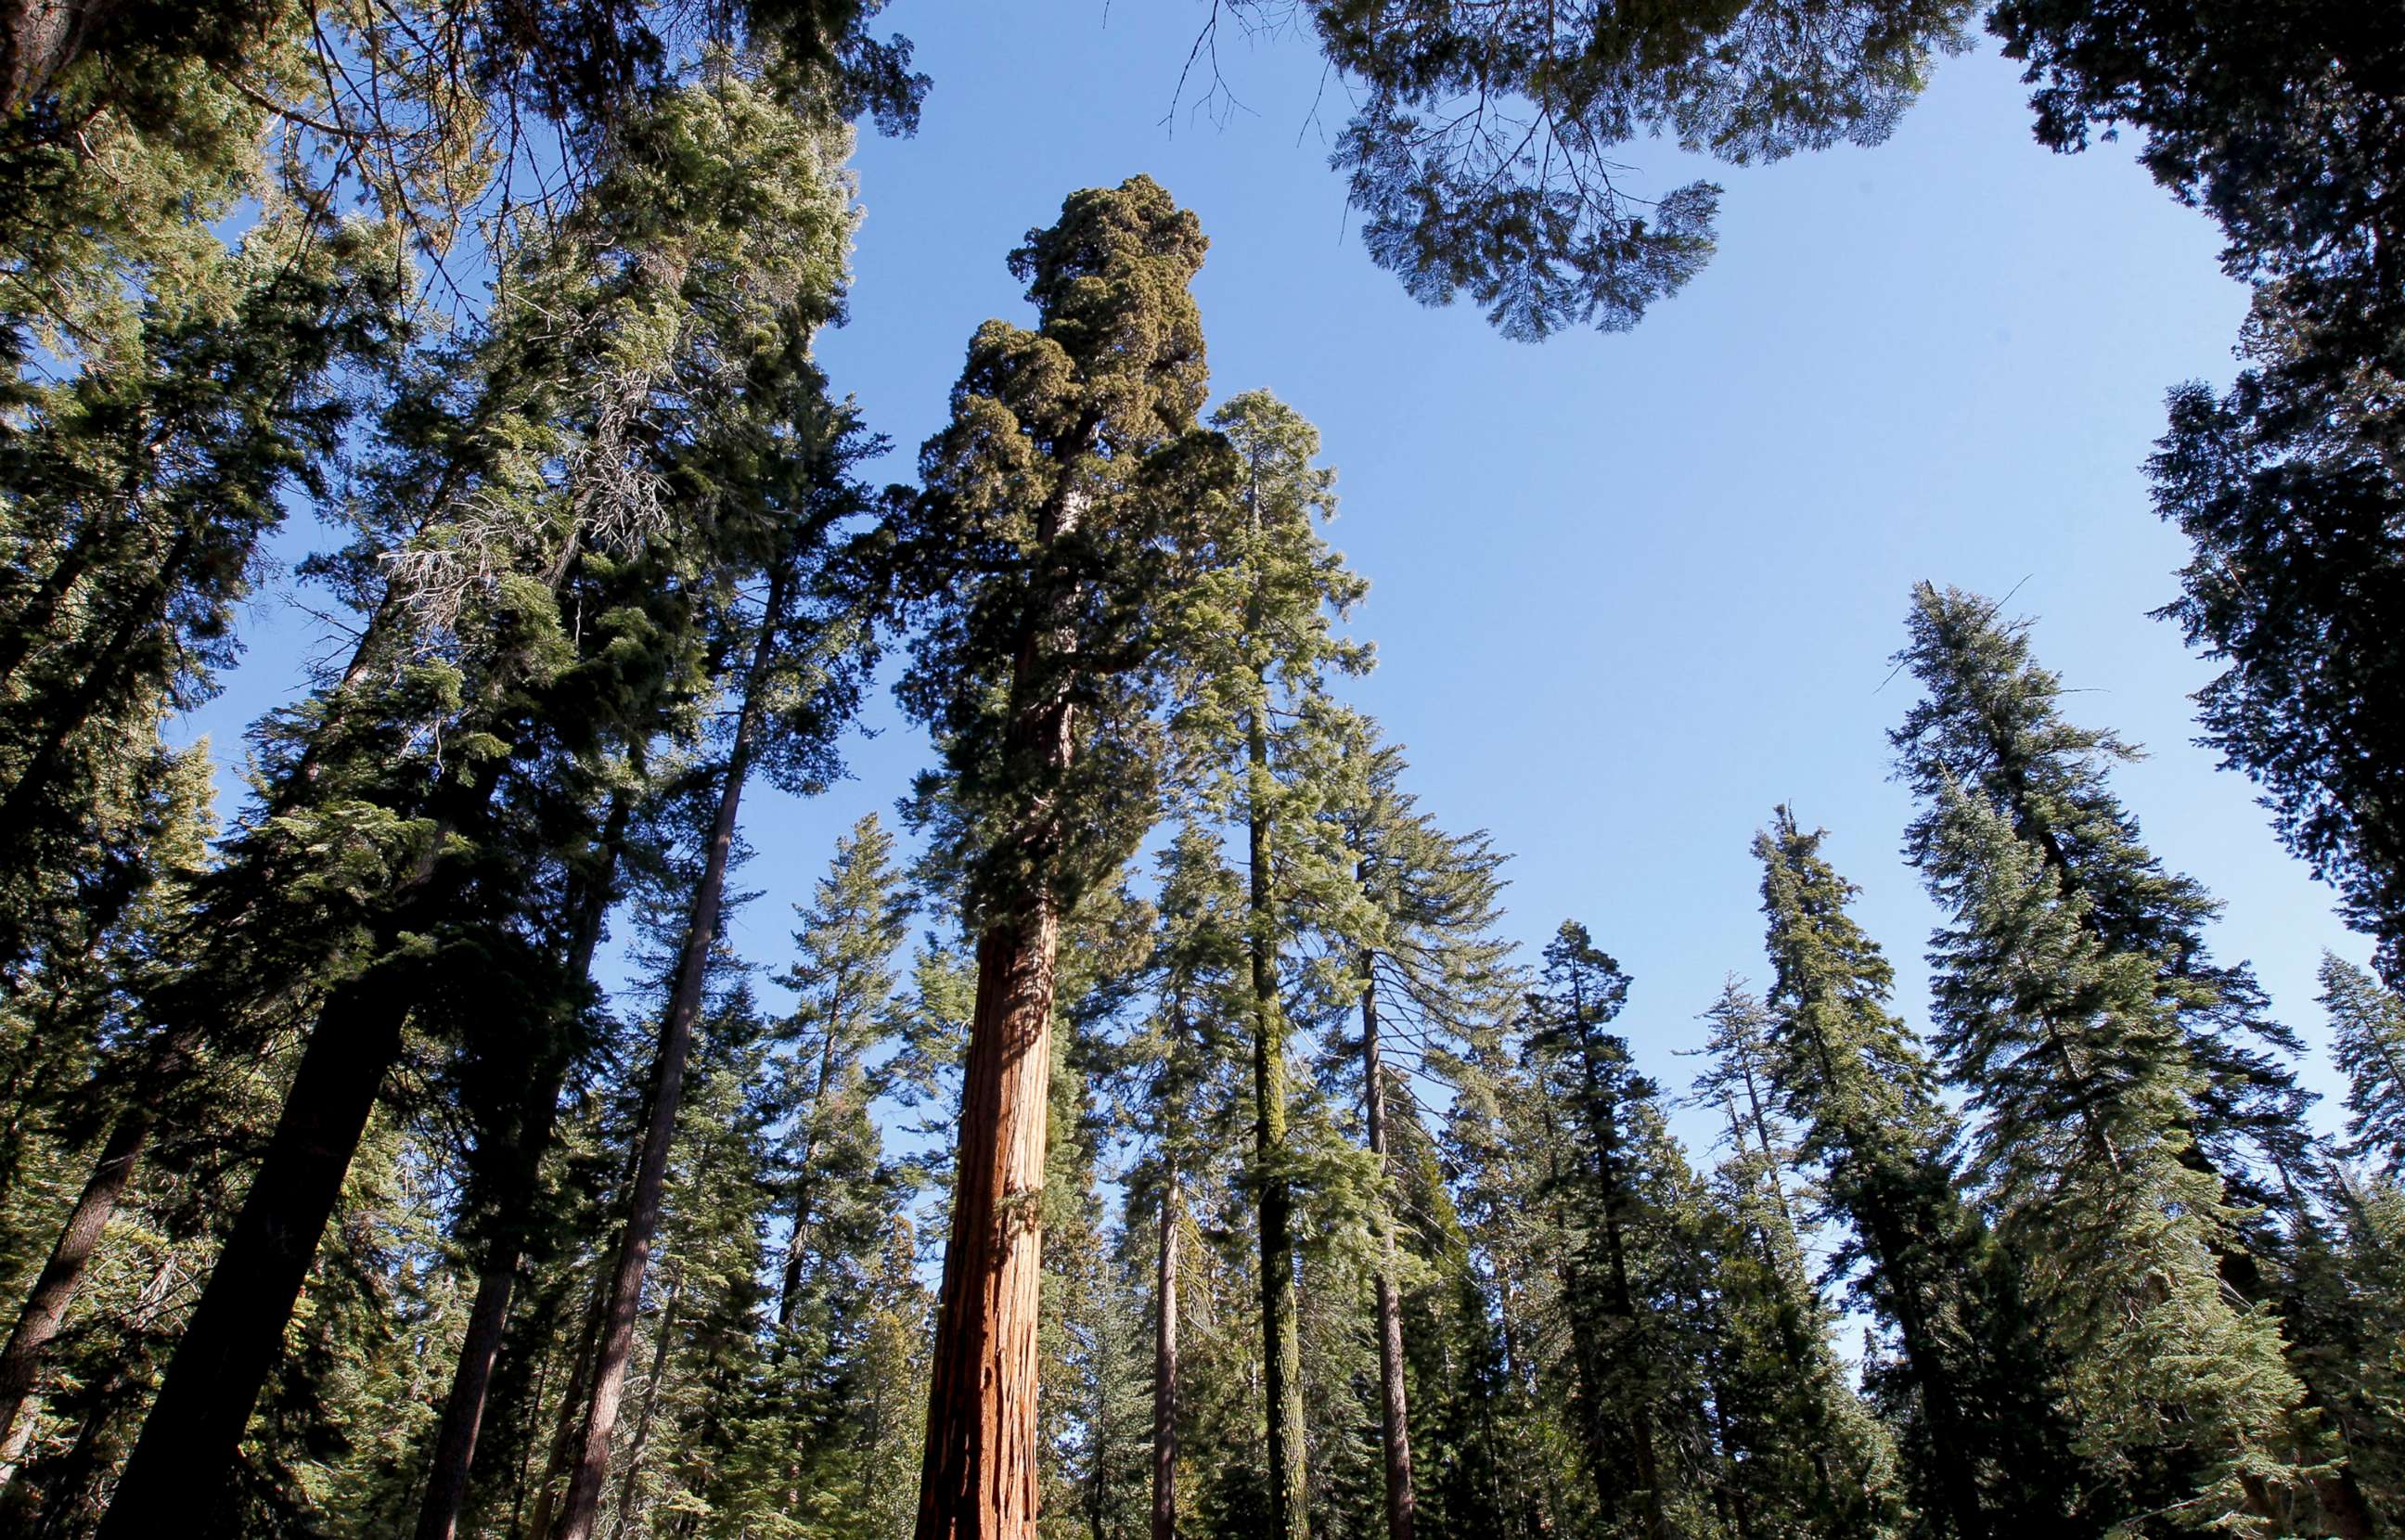 PHOTO: In this Feb. 26, 2013, file photo, the Mariposa Grove of Giants Sequoias is shown in Yosemite National Park in California.